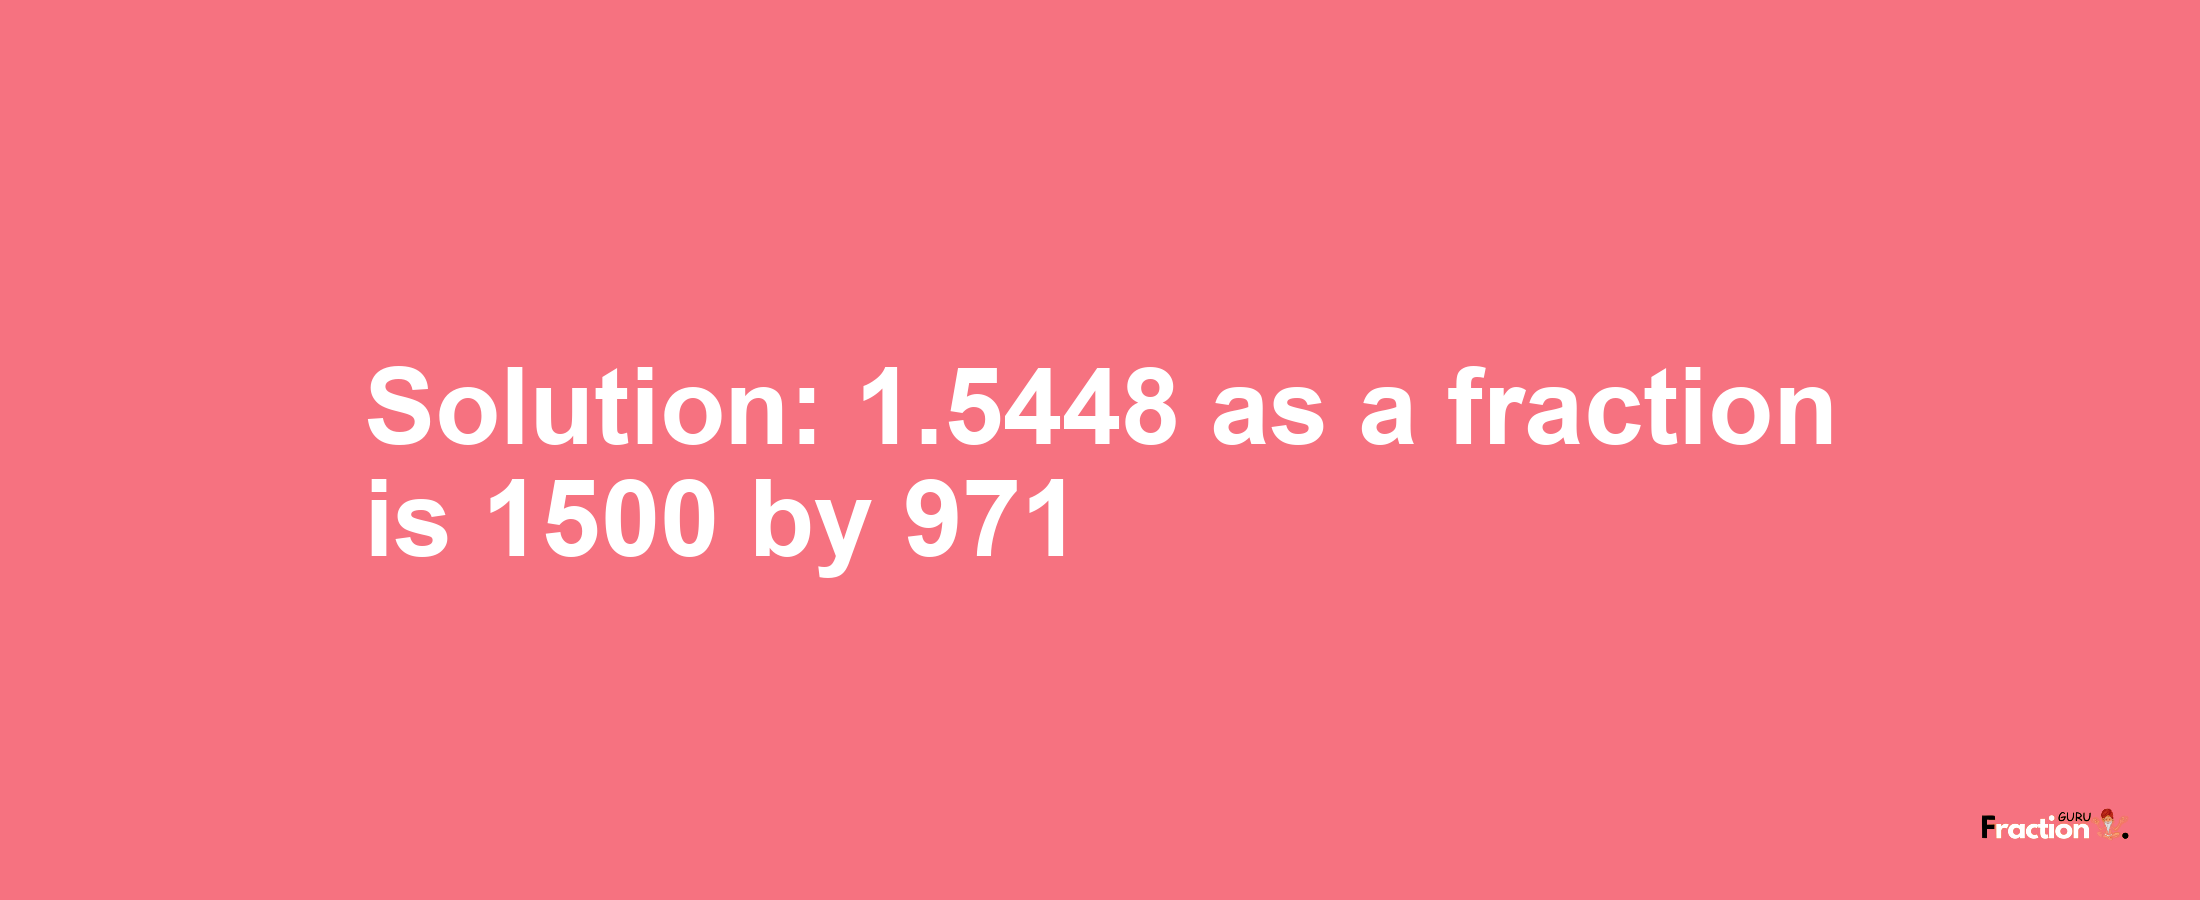 Solution:1.5448 as a fraction is 1500/971